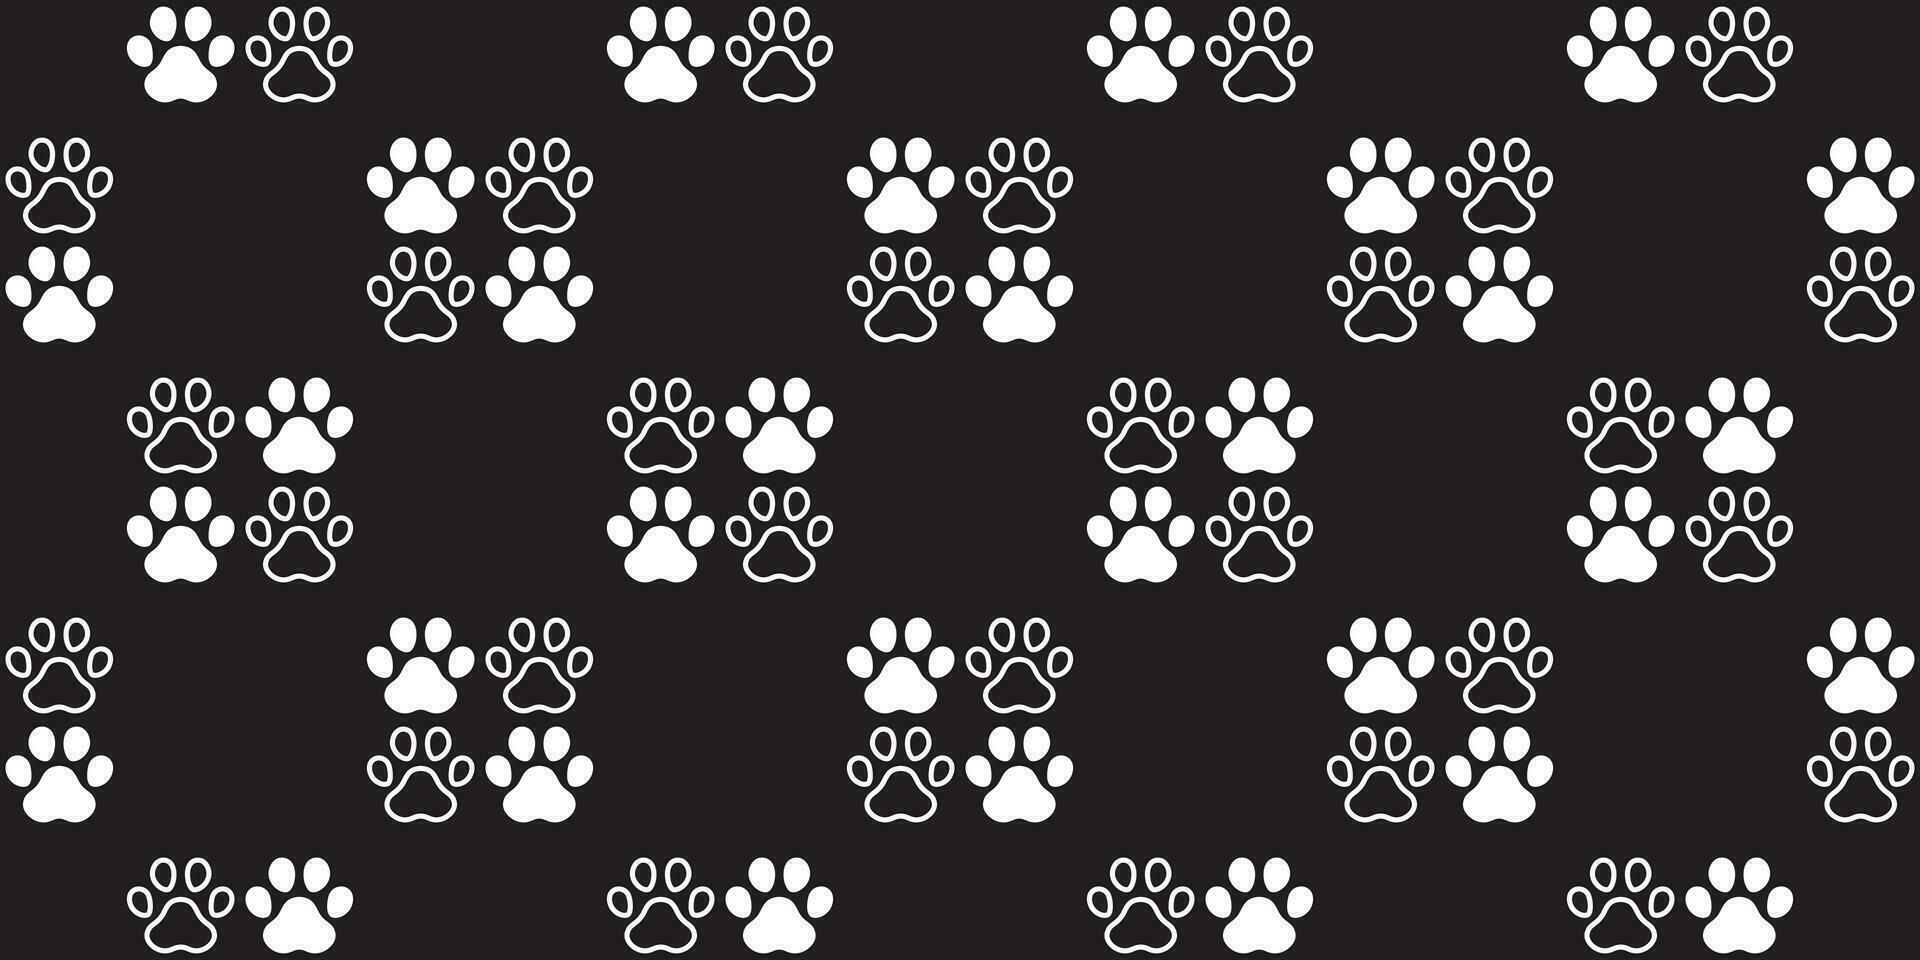 dog paw seamless pattern footprint vector french bulldog icon scarf isolated cartoon repeat wallpaper tile background illustration black doodle design